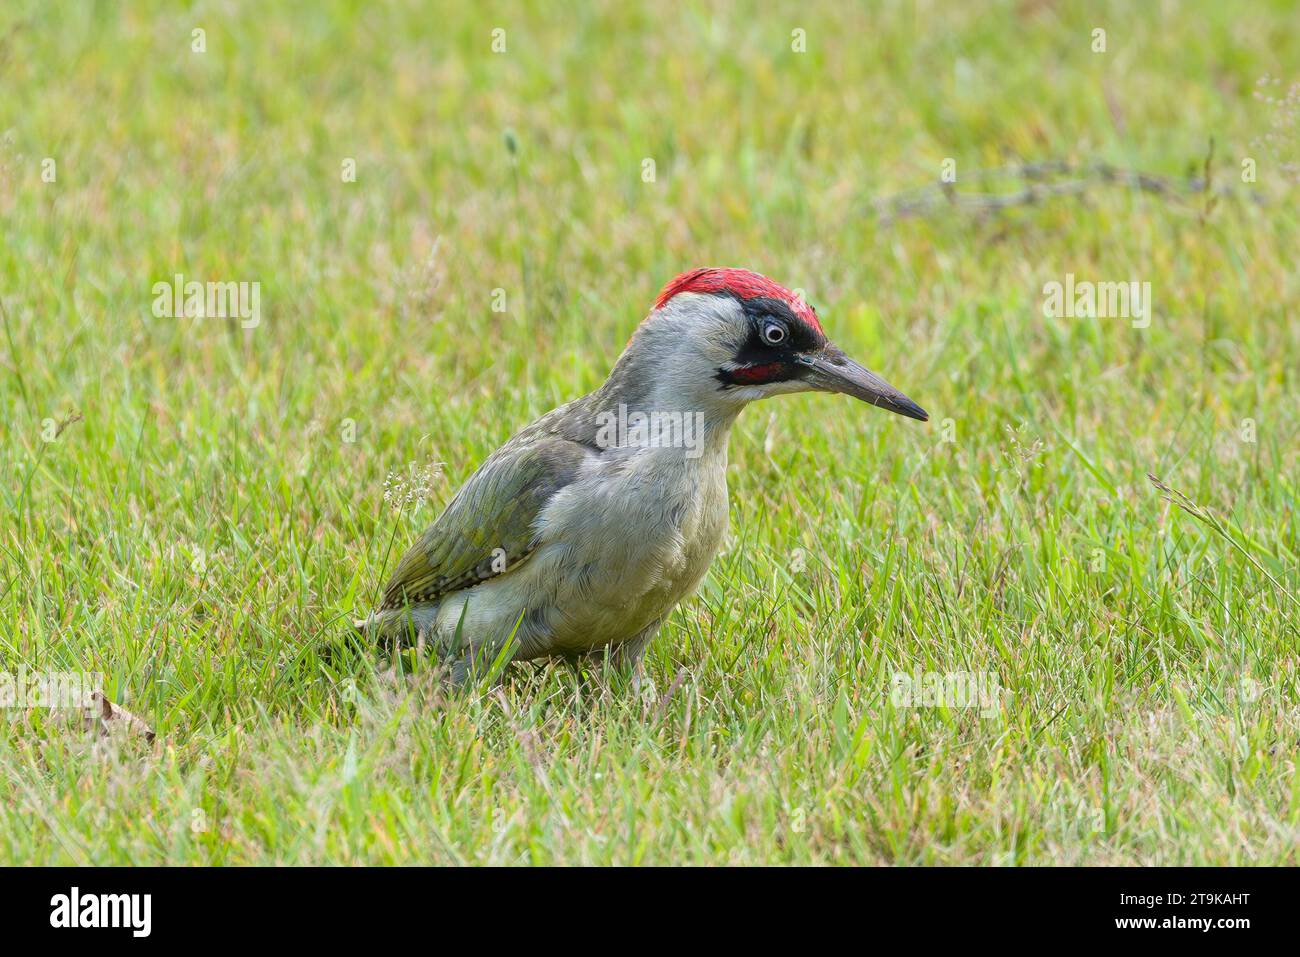 Male European green woodpecker (Picus viridis) foraging on lawn in a UK garden Stock Photo